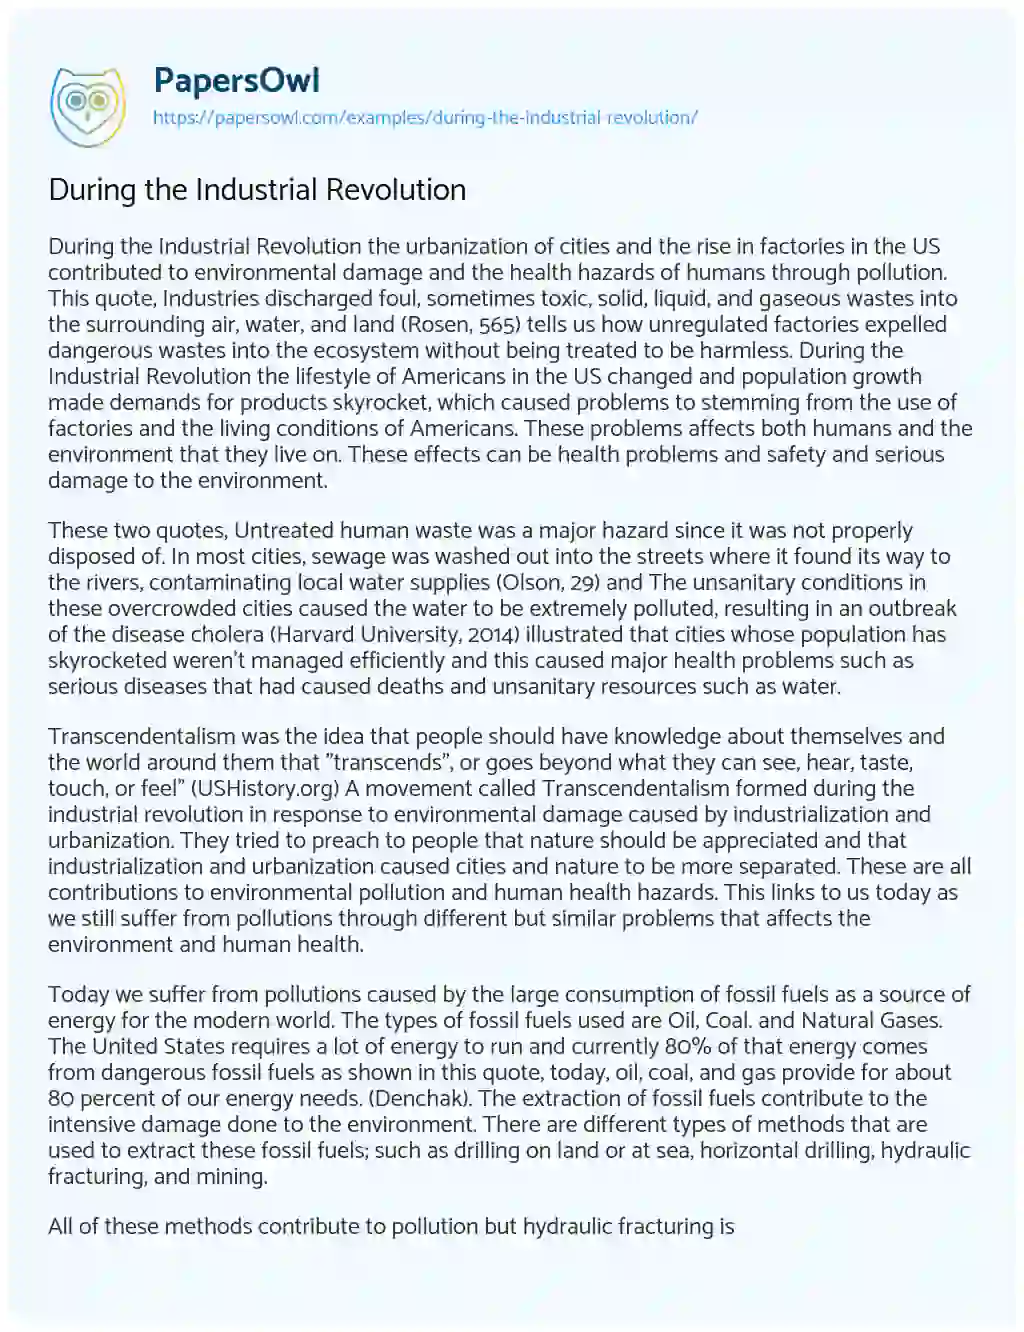 Essay on During the Industrial Revolution